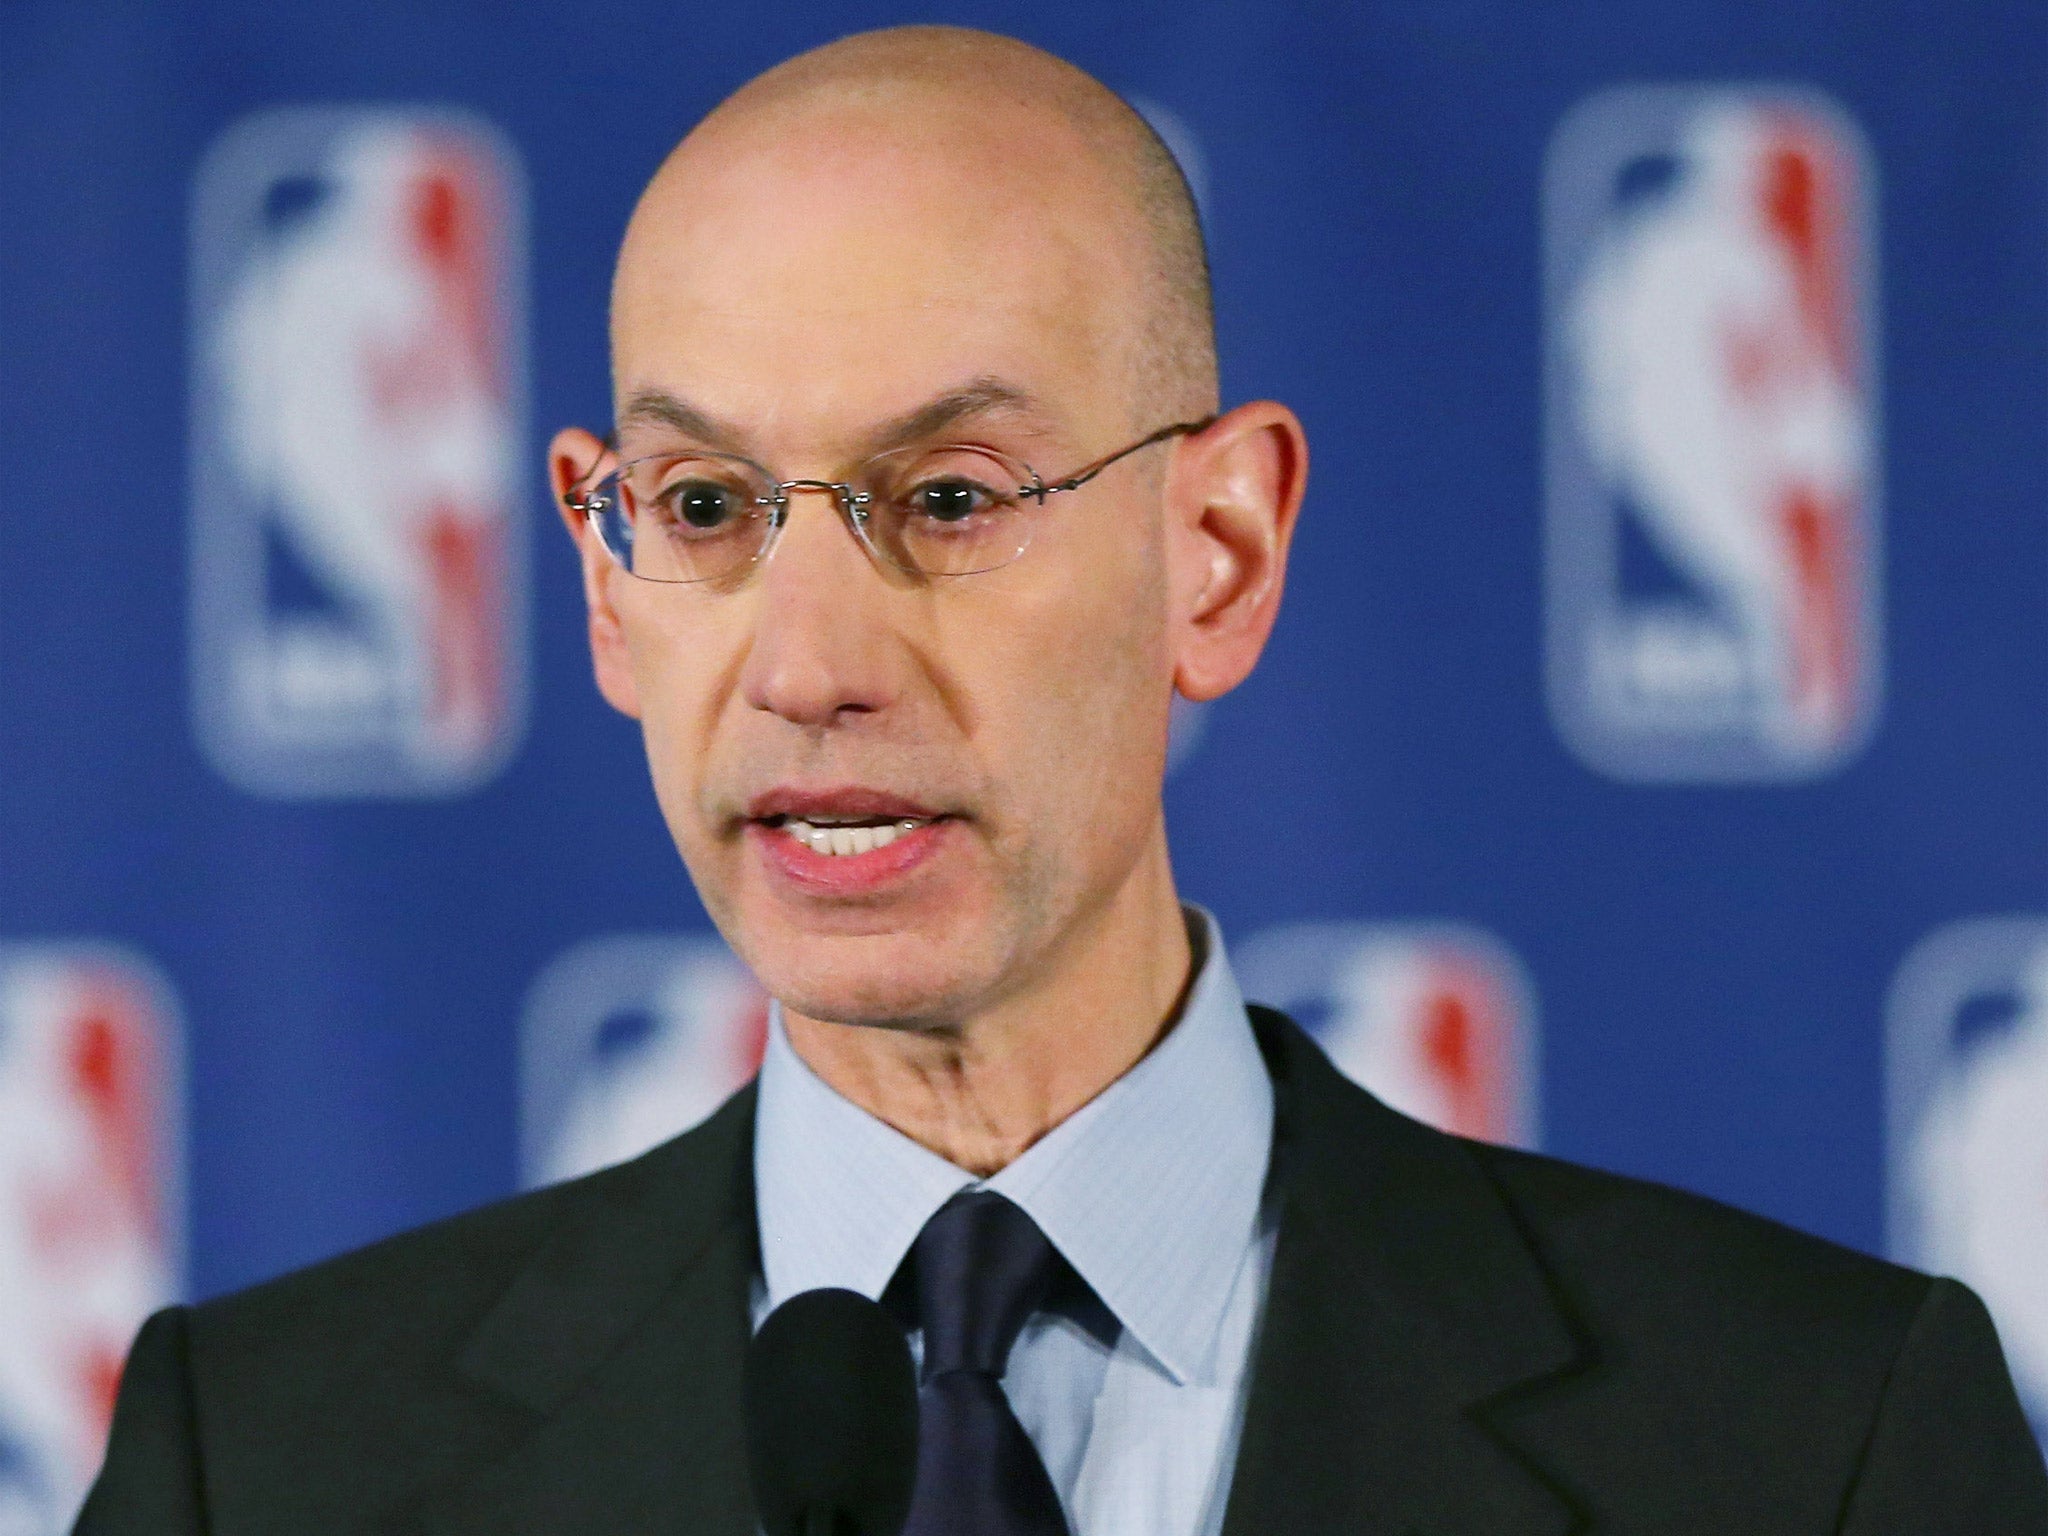 Adam Silver has only been in his job since February but already he has taken decisive action on racism